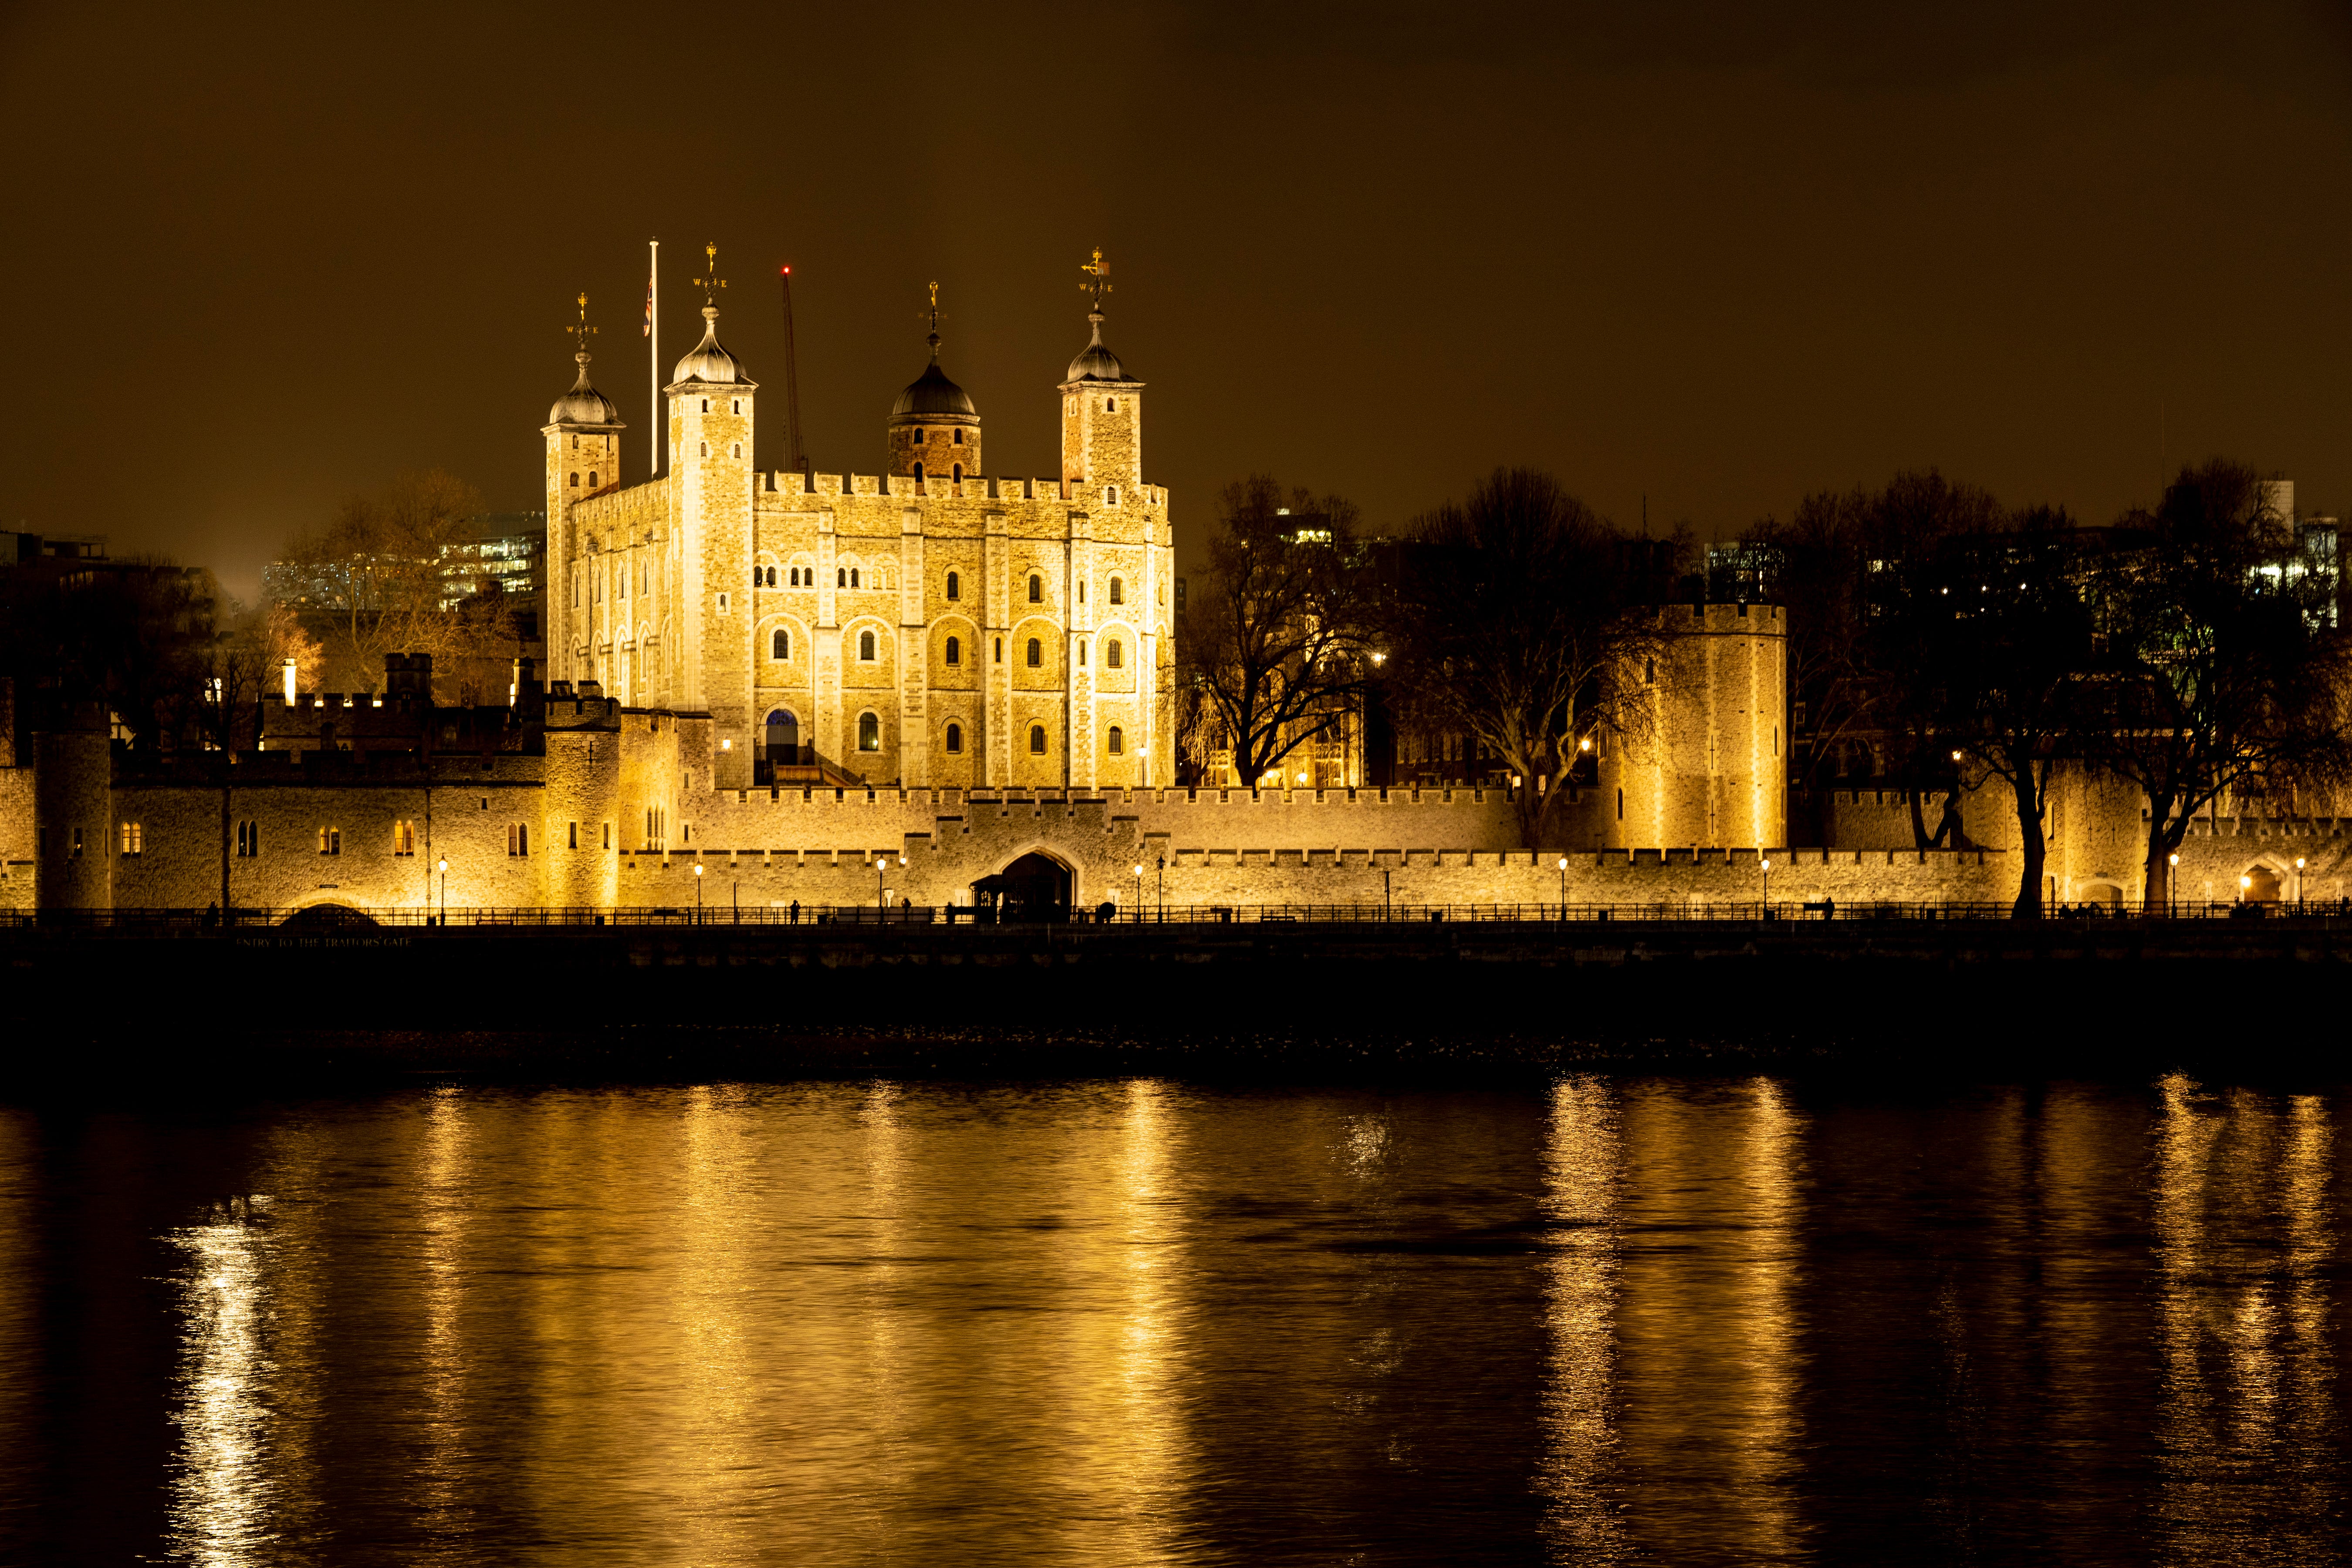 Tower of London (Photo by Nick Fewings on Unsplash)